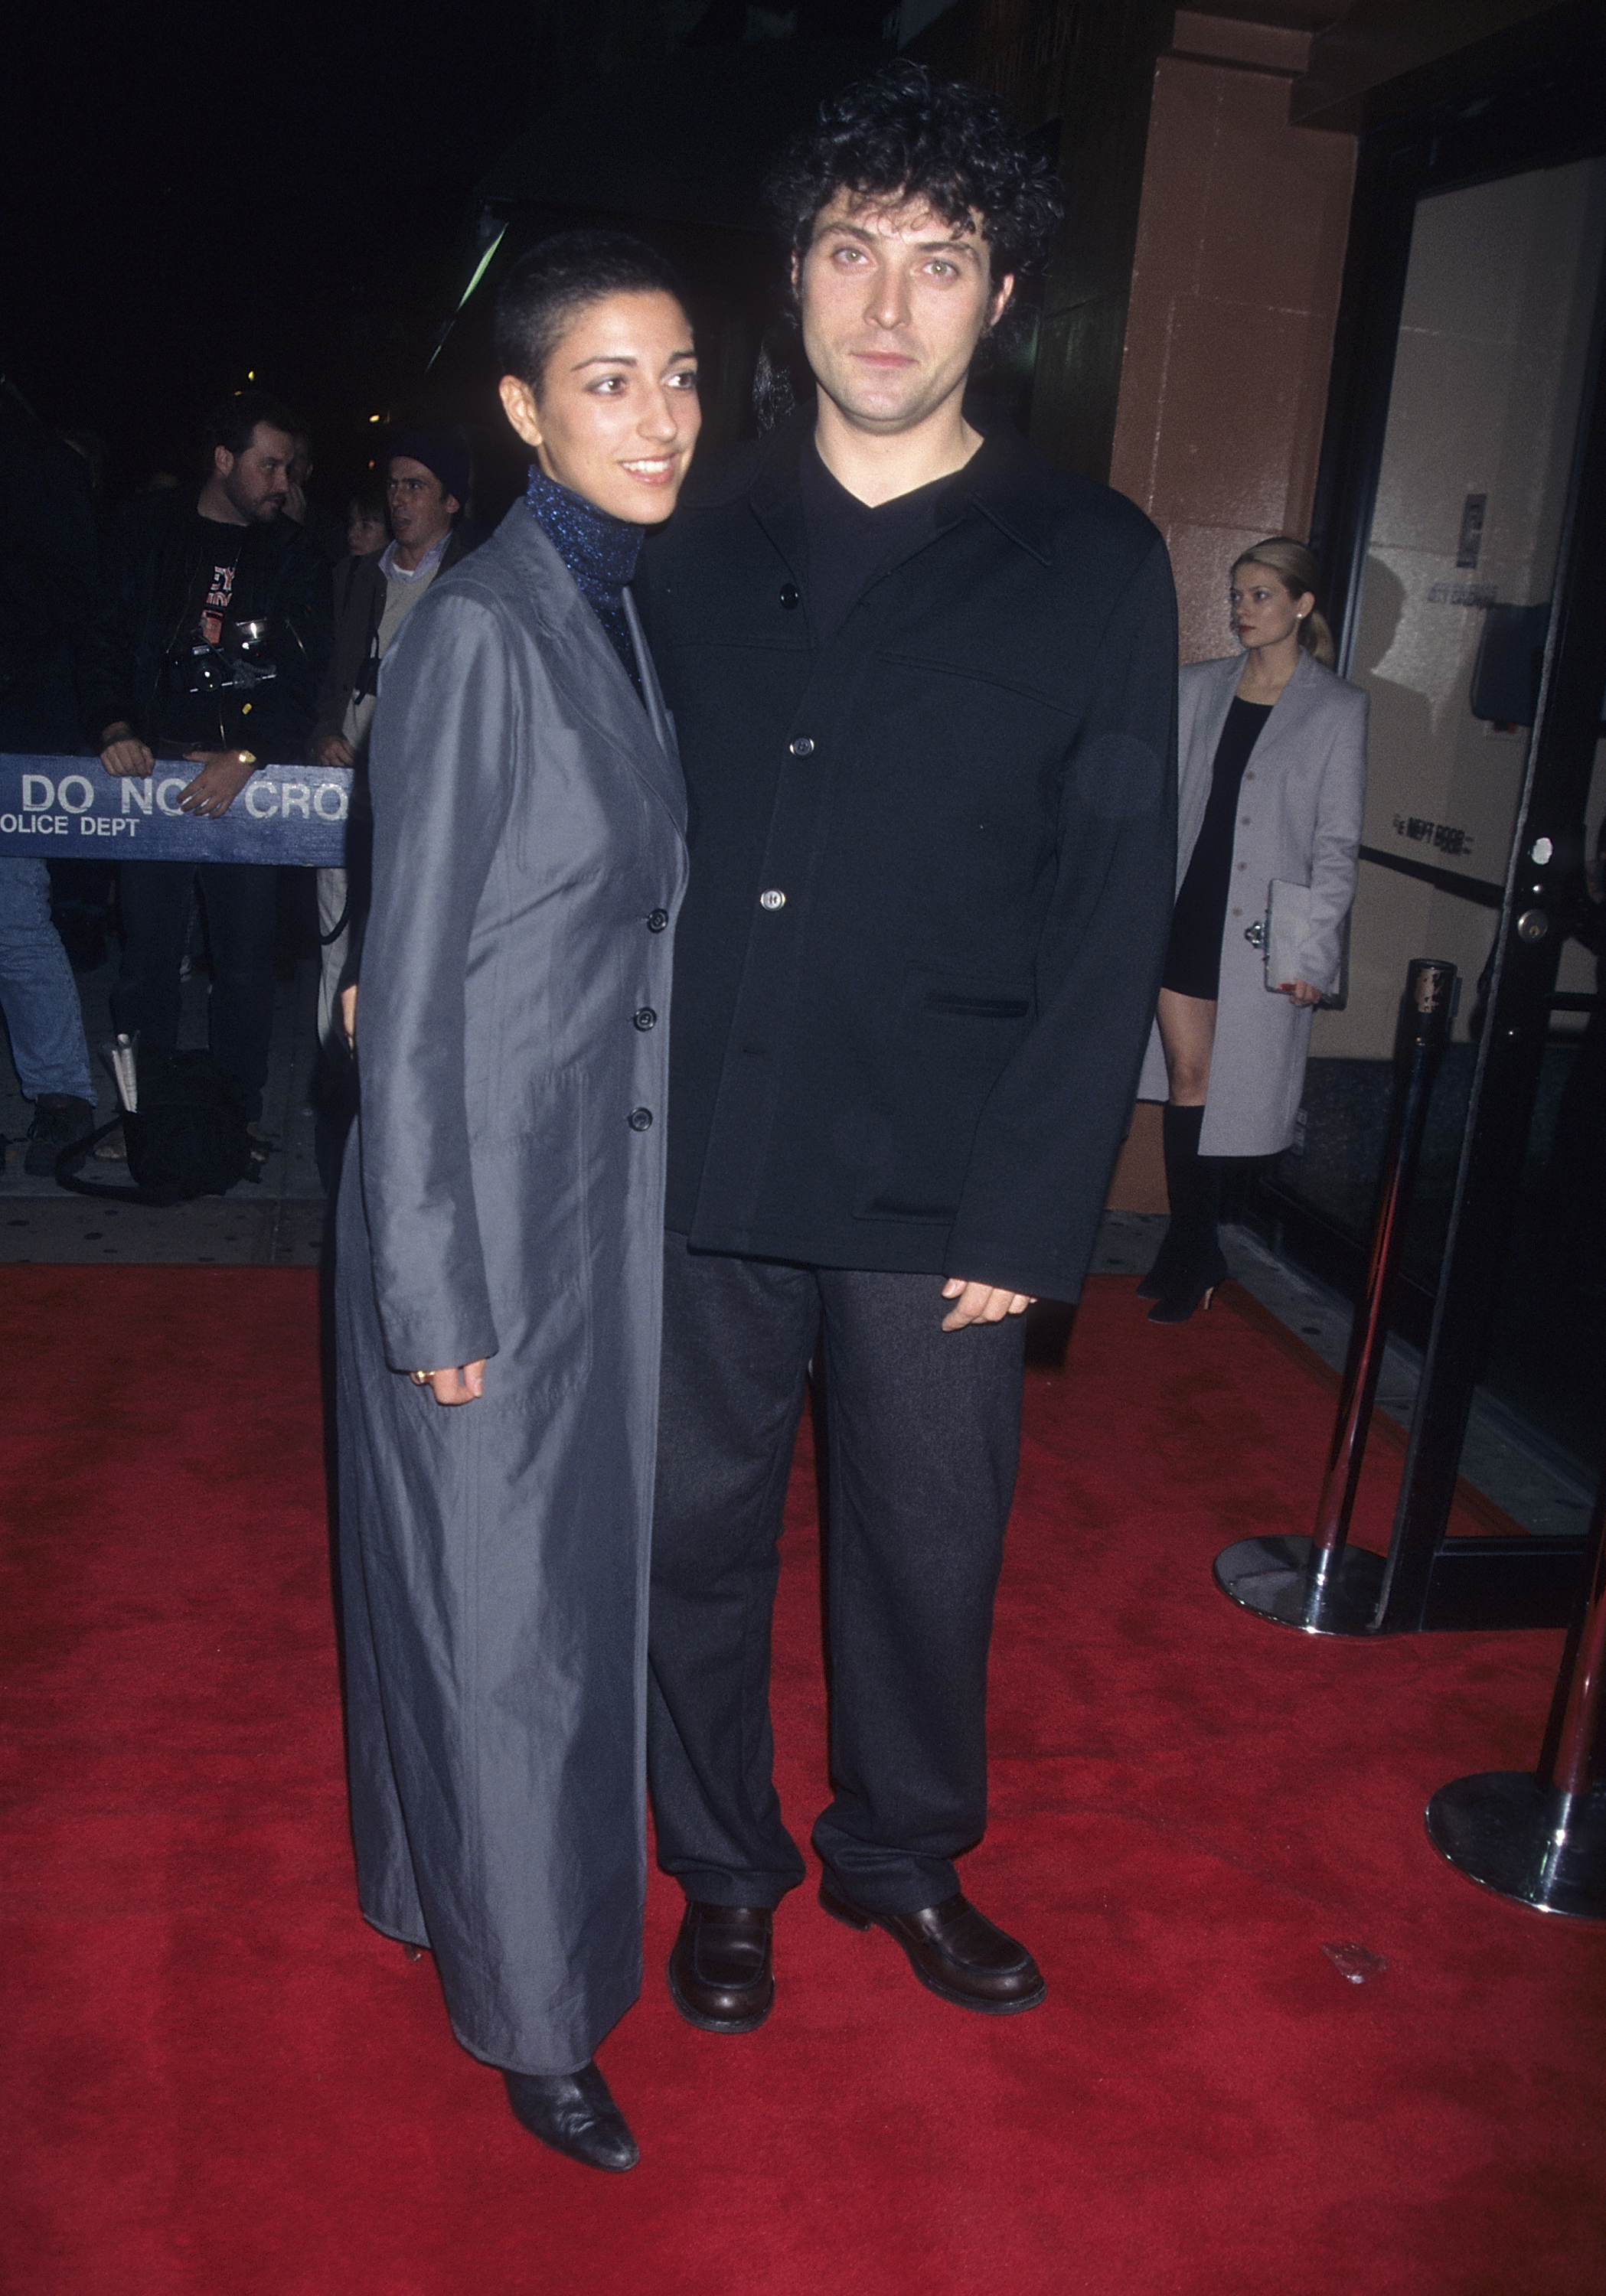 Rufus Sewell and Yasmin Abdallah at the premiere of "A Life Less Ordinary" on October 3, 1997, in New York | Source: Getty Images